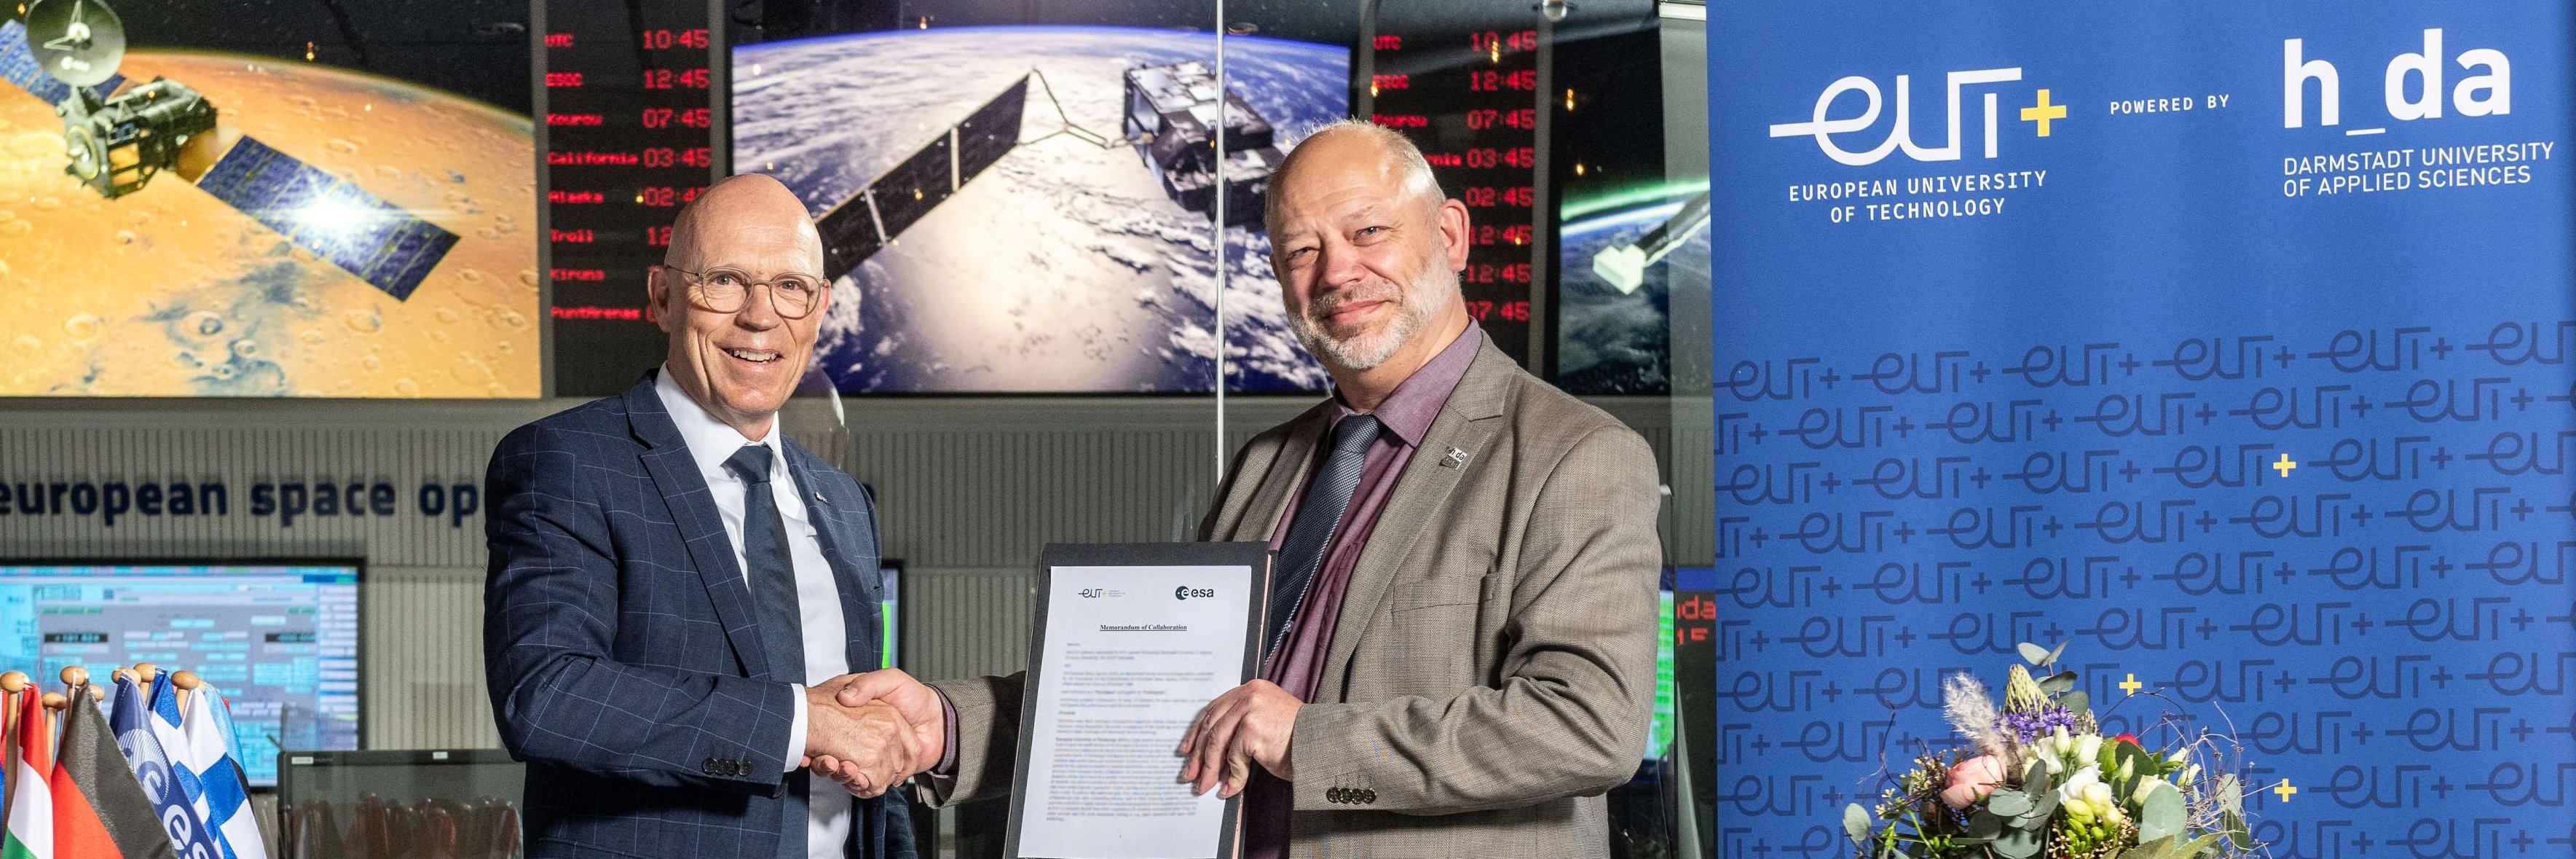 Dr. Rolf Densing, ESA Director of Operations and h_da president Prof. Dr. Arnd Steinmetz after the signing of the agreement at ESA in Darmstadt.